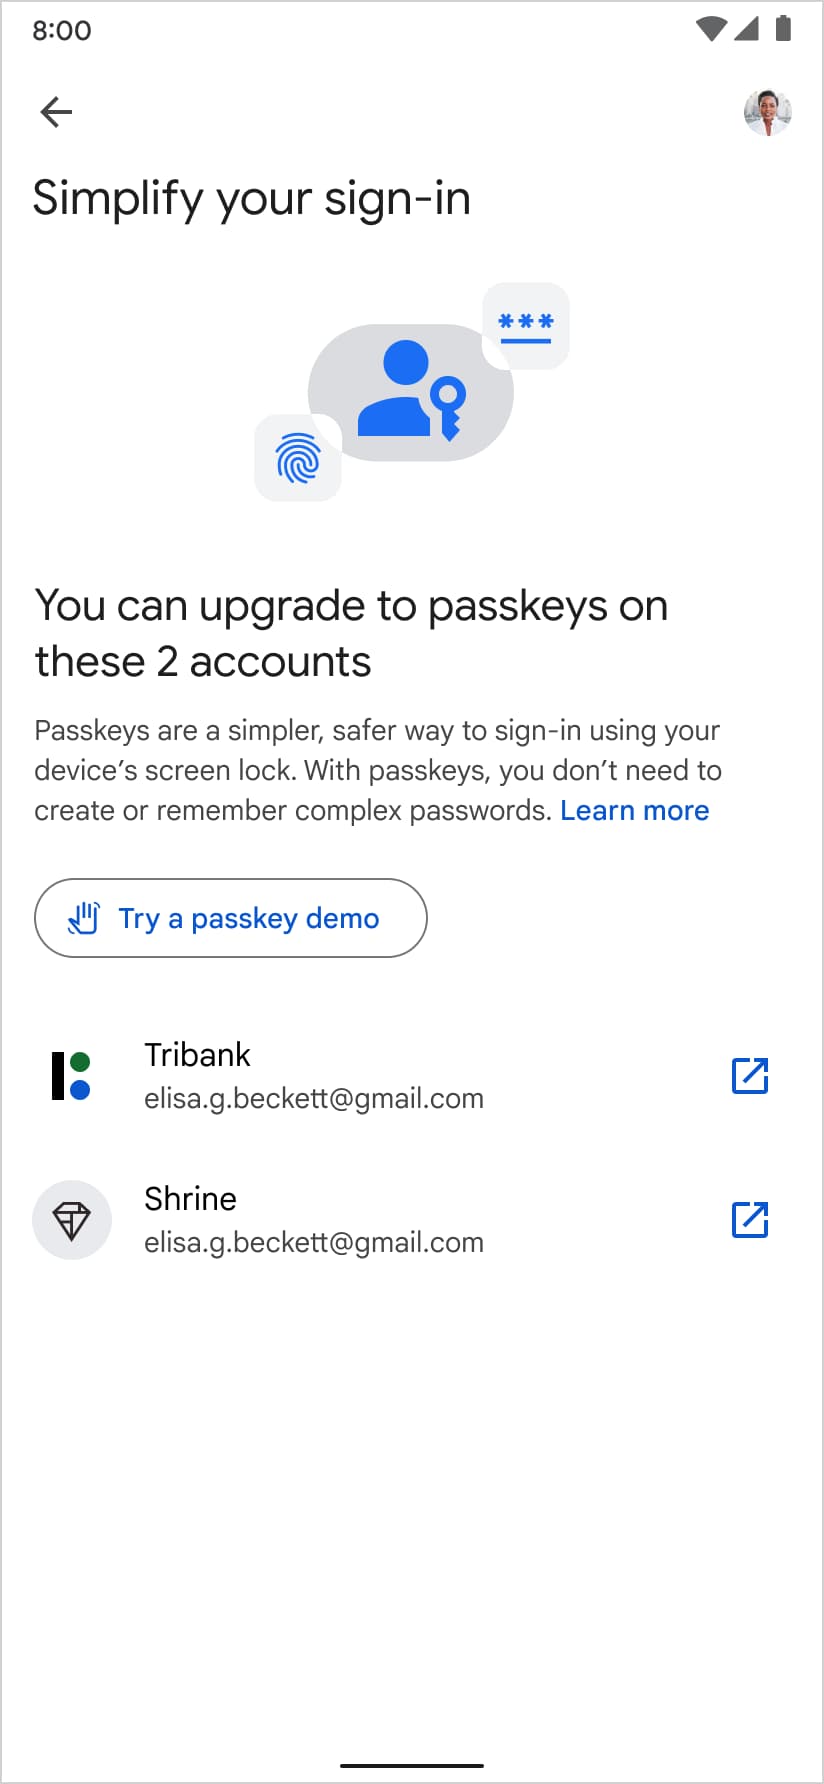 Upon accepting the suggestion the user is directed to a list of domains where they can create a passkey. Tapping on an entry seamlessly redirects users to the corresponding enrollment page.